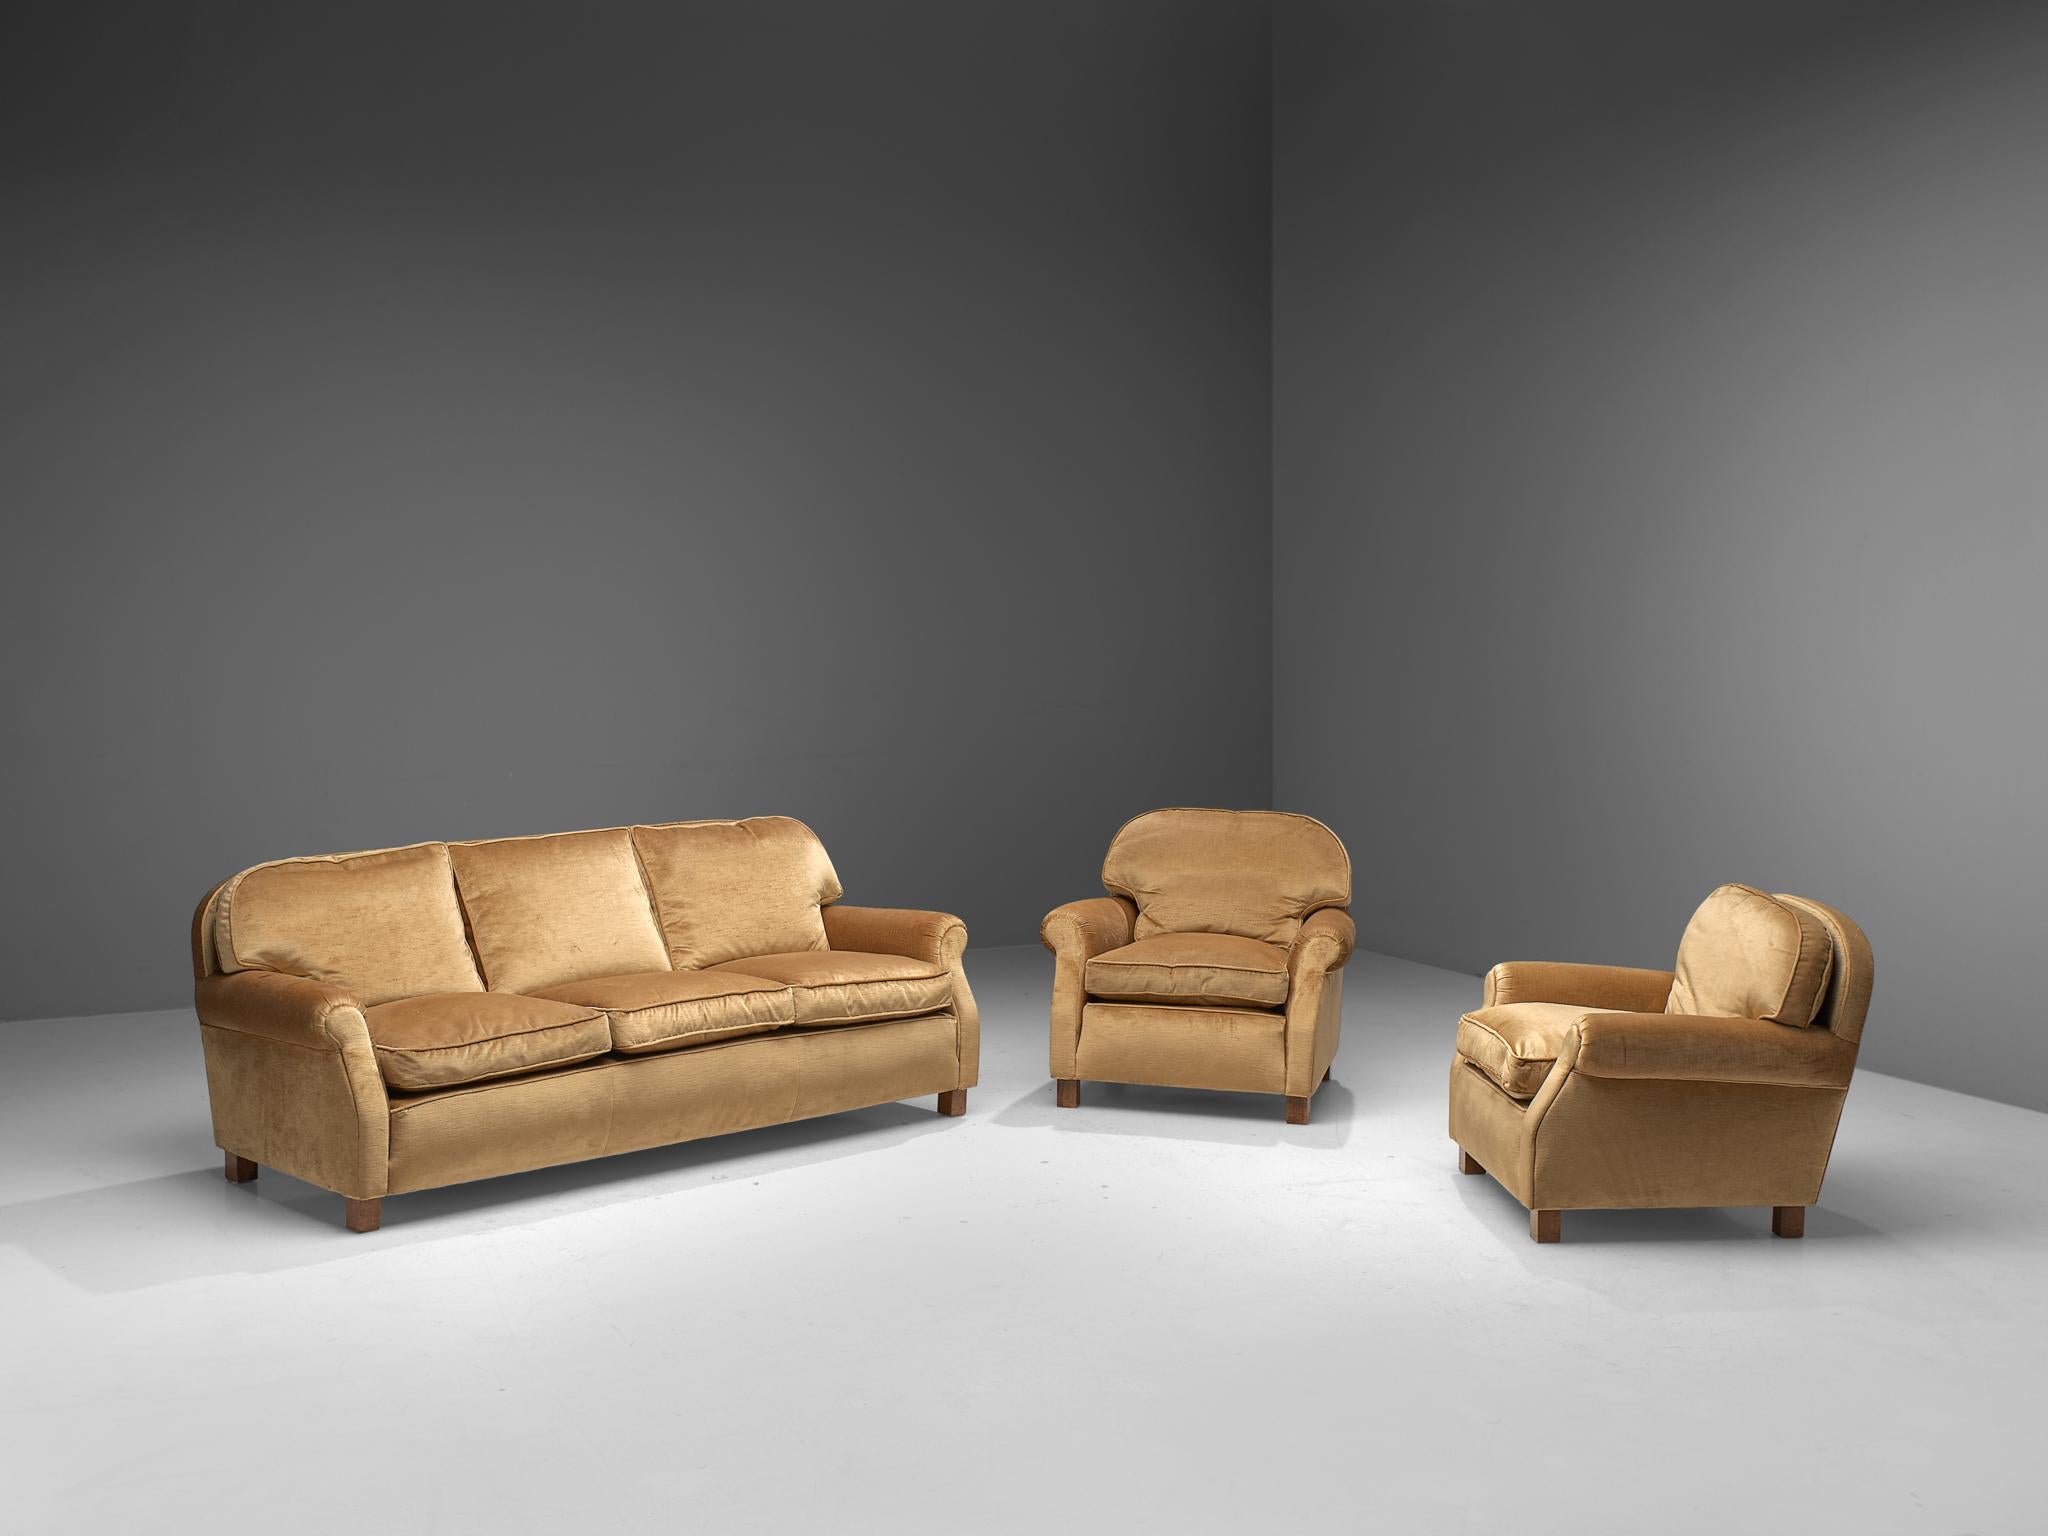 Living room set, three-seat sofa, two lounge chairs, velvet and wood, France, 1940s.

Grand and comfortable three-seat sofa and two beautiful lounge chairs in a beige velvet upholstery. Very comfortable pieces that feature deep and thick seats with